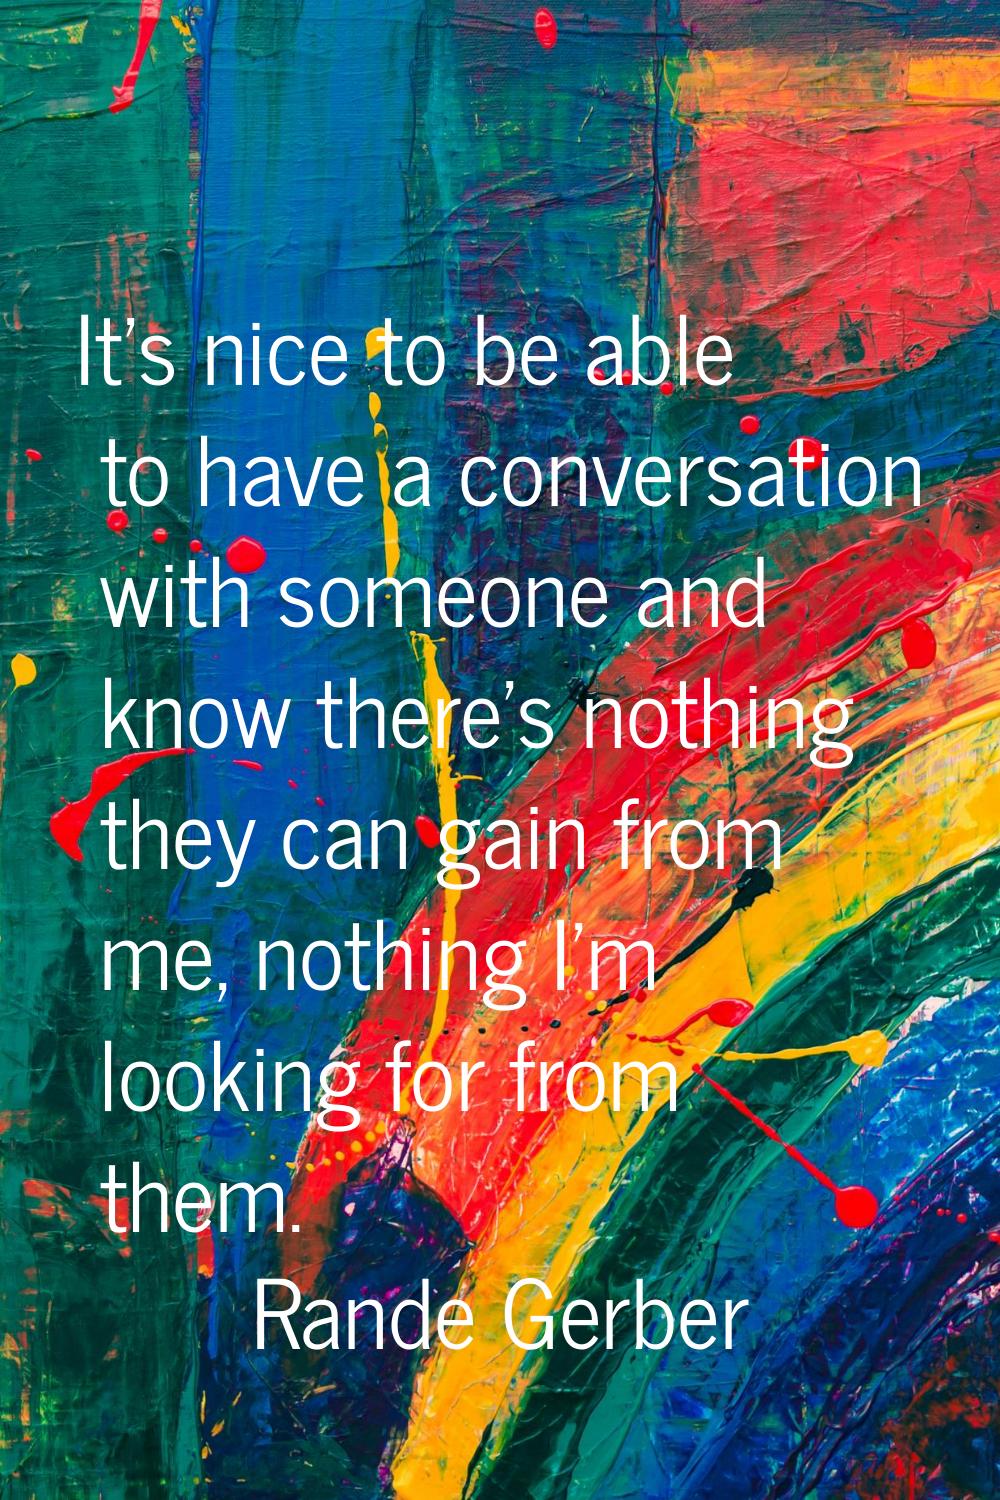 It's nice to be able to have a conversation with someone and know there's nothing they can gain fro